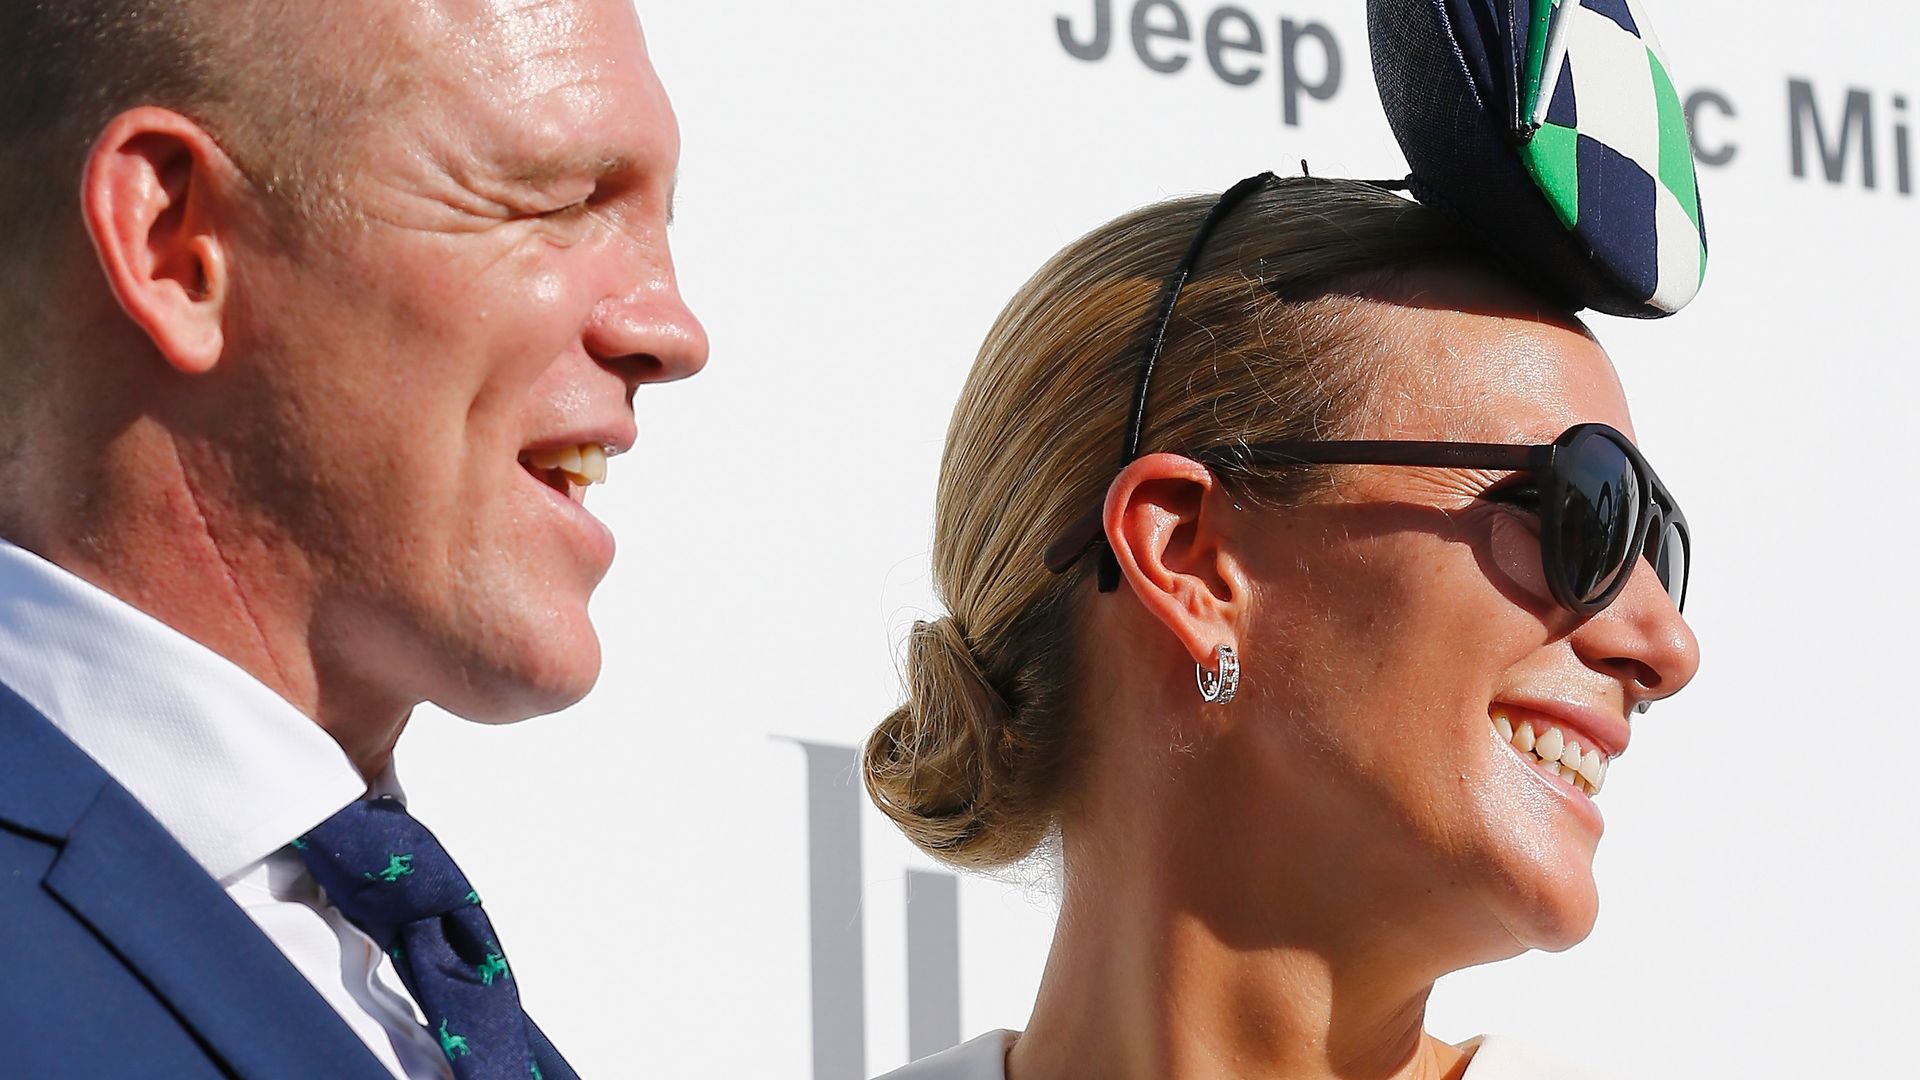 Zara Phillips and Mike Tindall  at Magic Millions Raceday on January 14, 2017 in Gold Coast, Australia.  